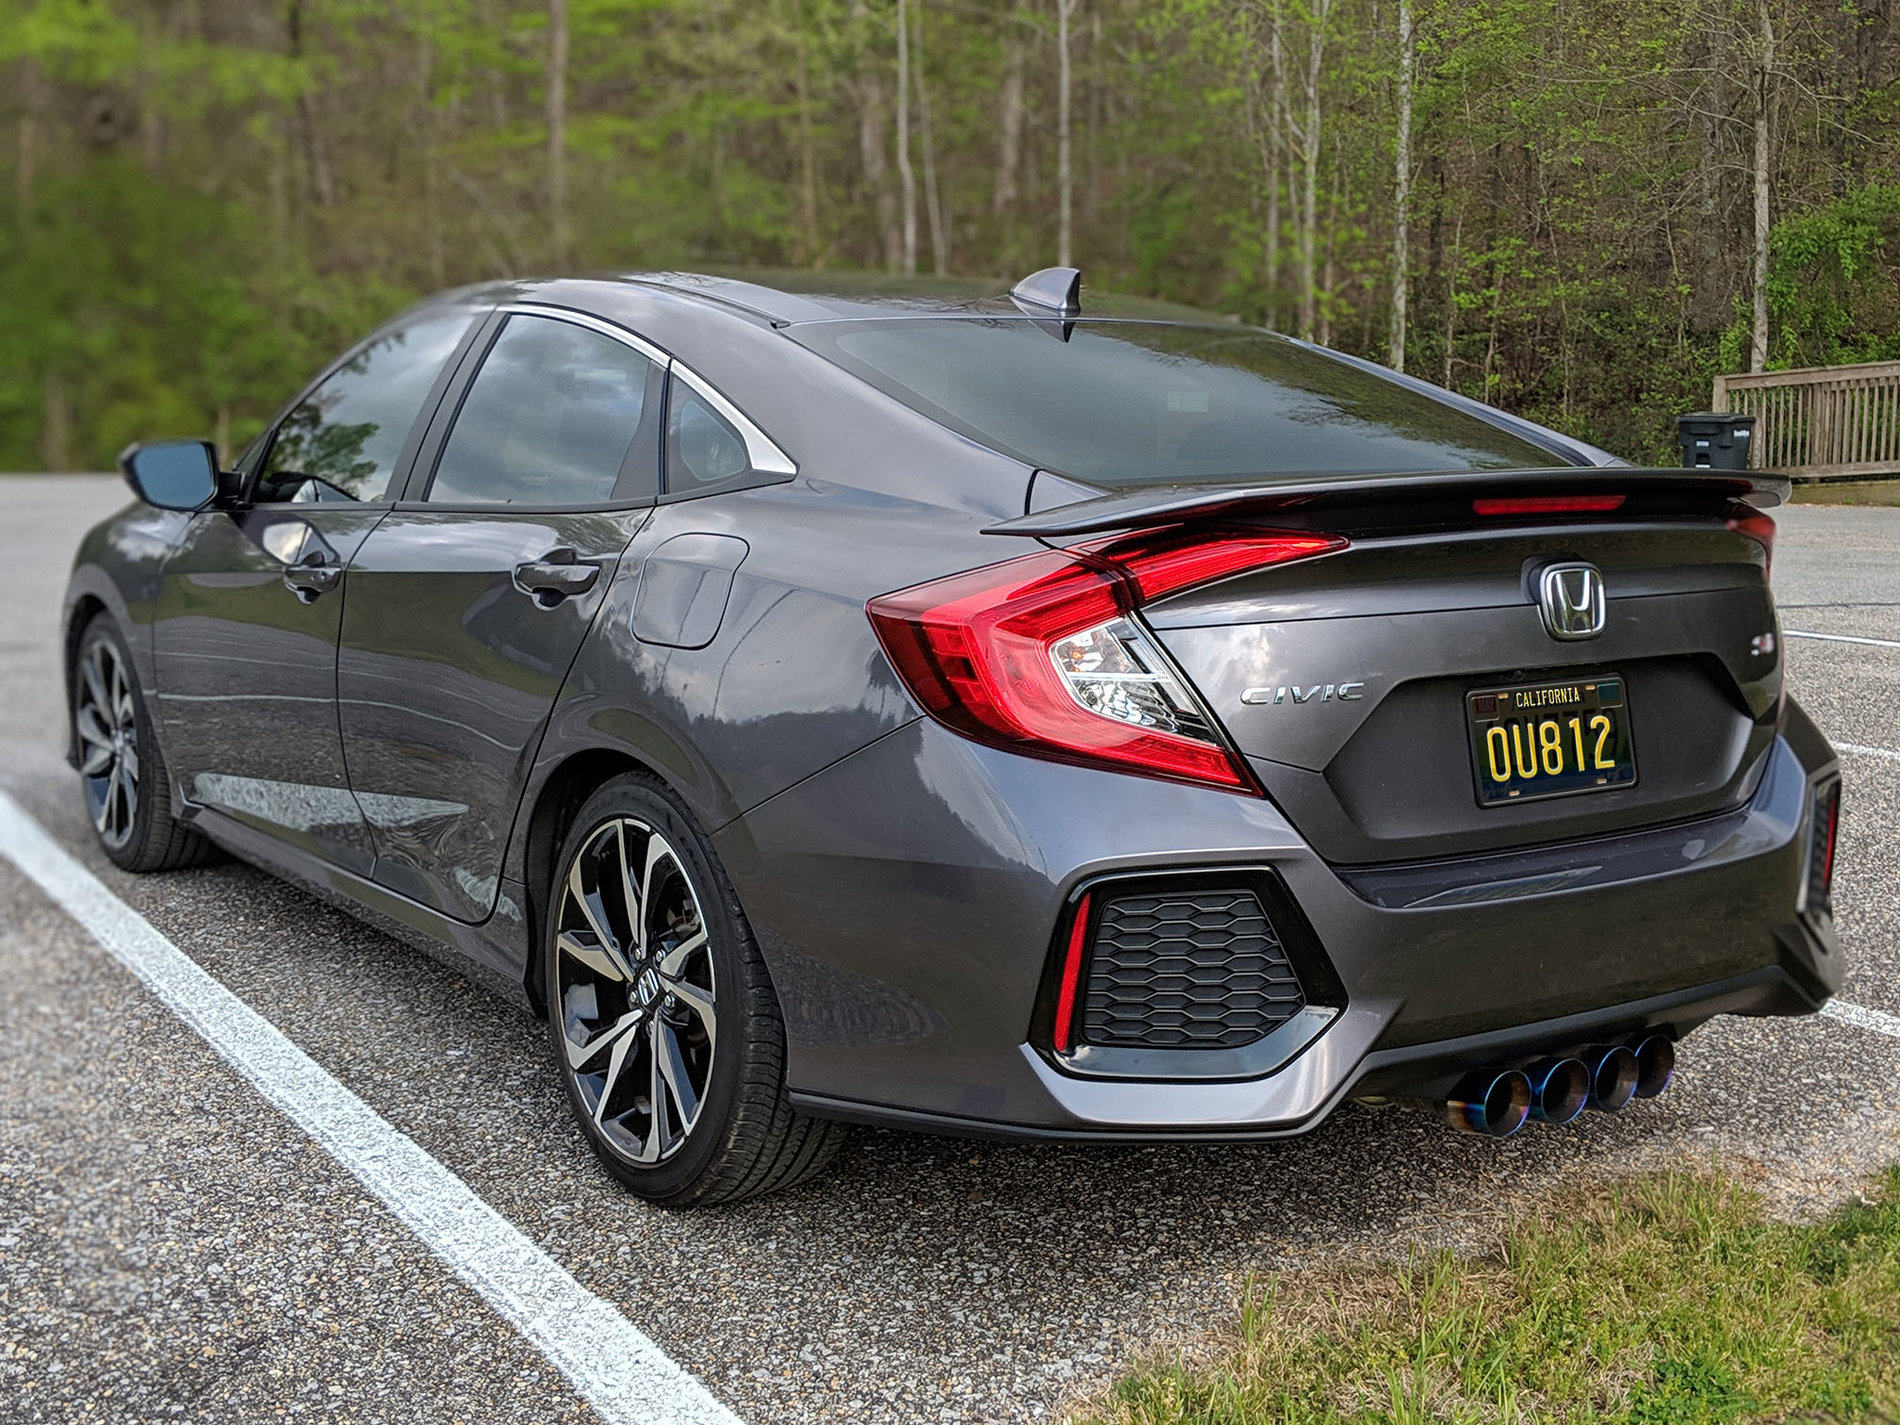 Honda Civic 10th gen What are your favorite Civic Si exhausts? 0U